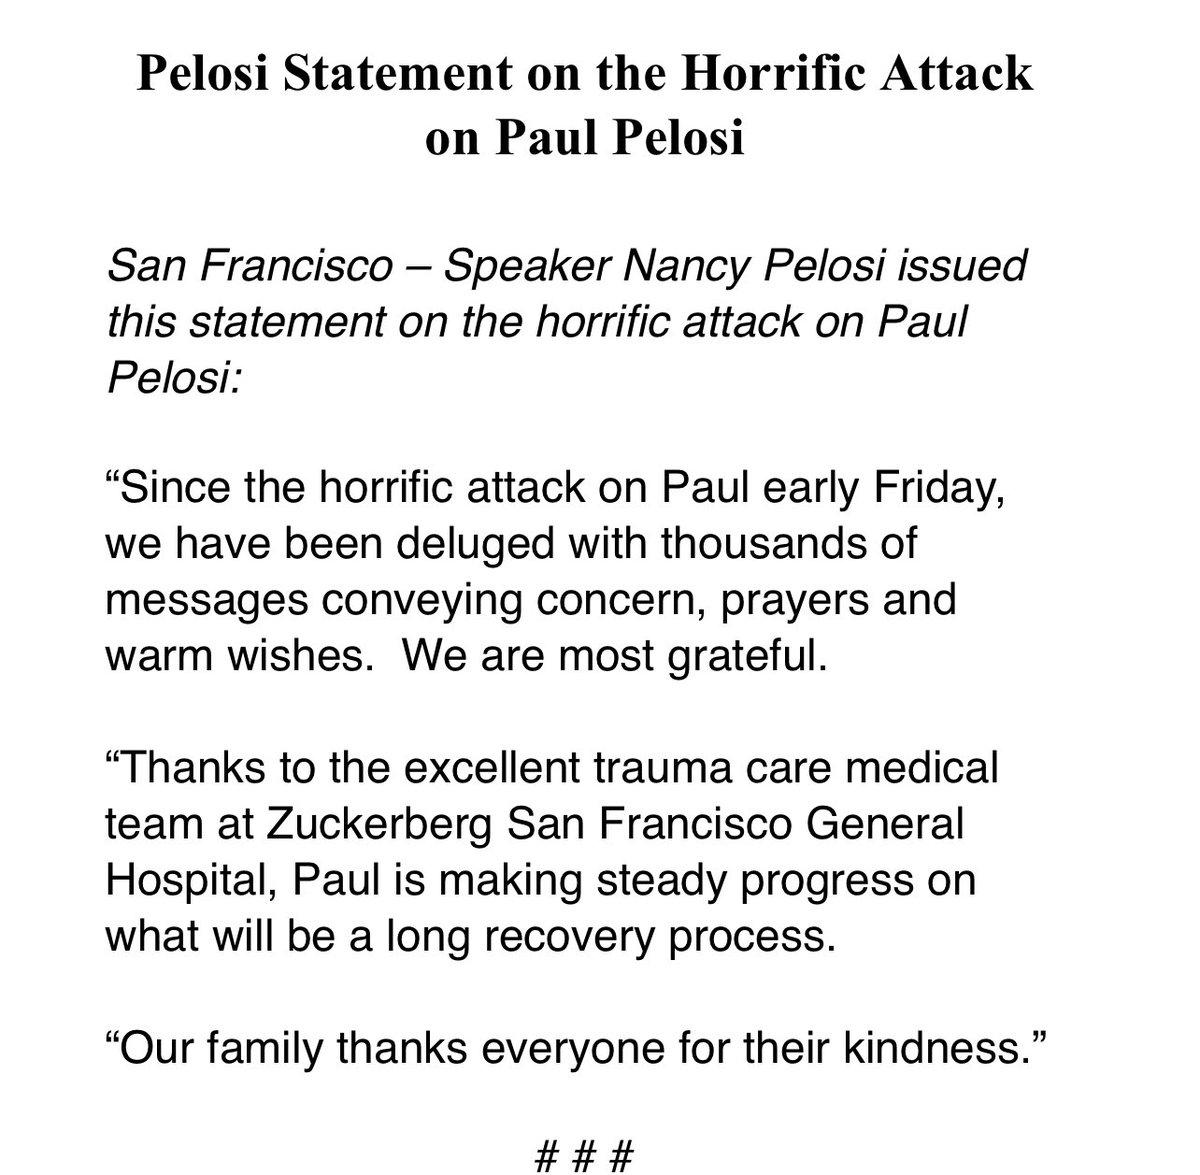 NEW: Statement from @SpeakerPelosi on the attack on her husband Paul, his care and public concern.